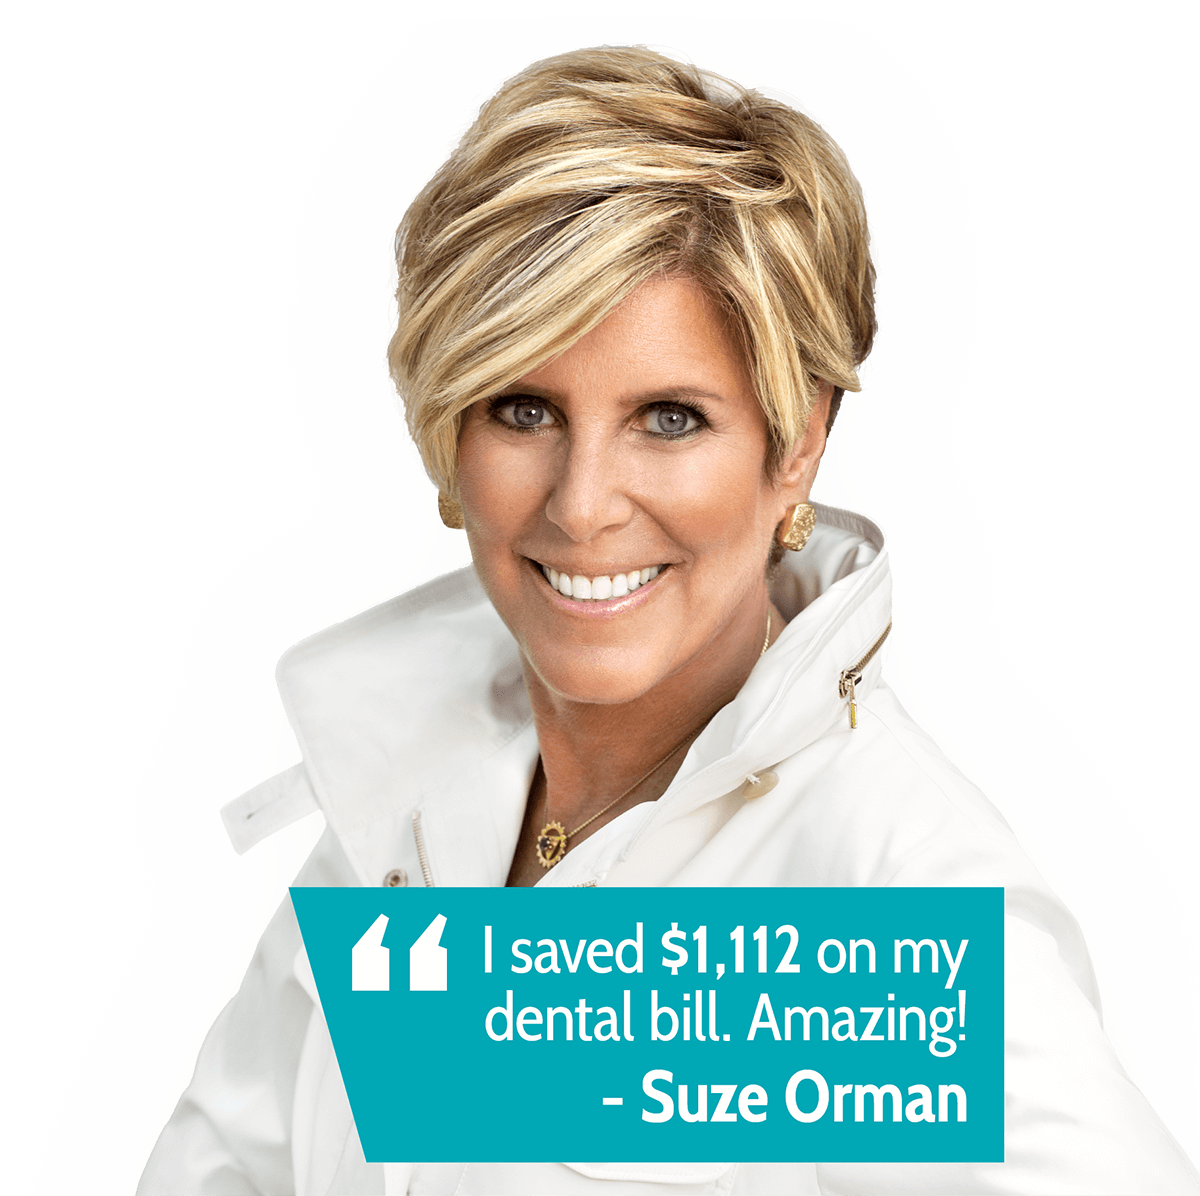 I saved $1,112 on my dental bill, Amazing! Quote by Suze Orman